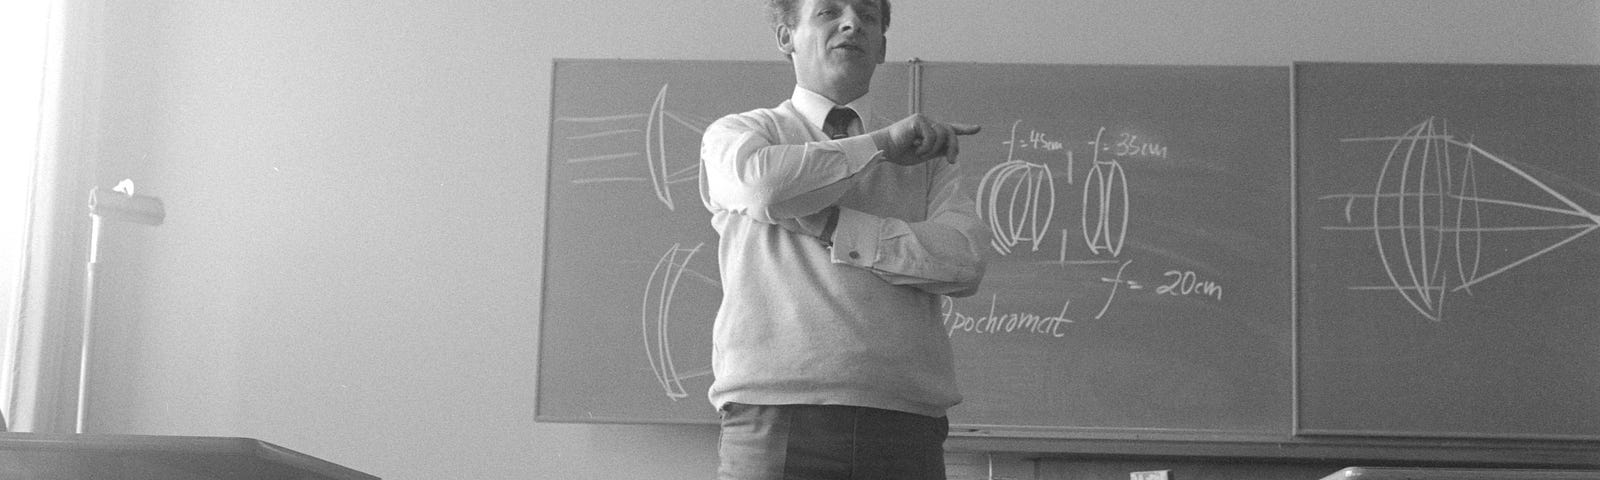 Black and white photo of teacher lecturing